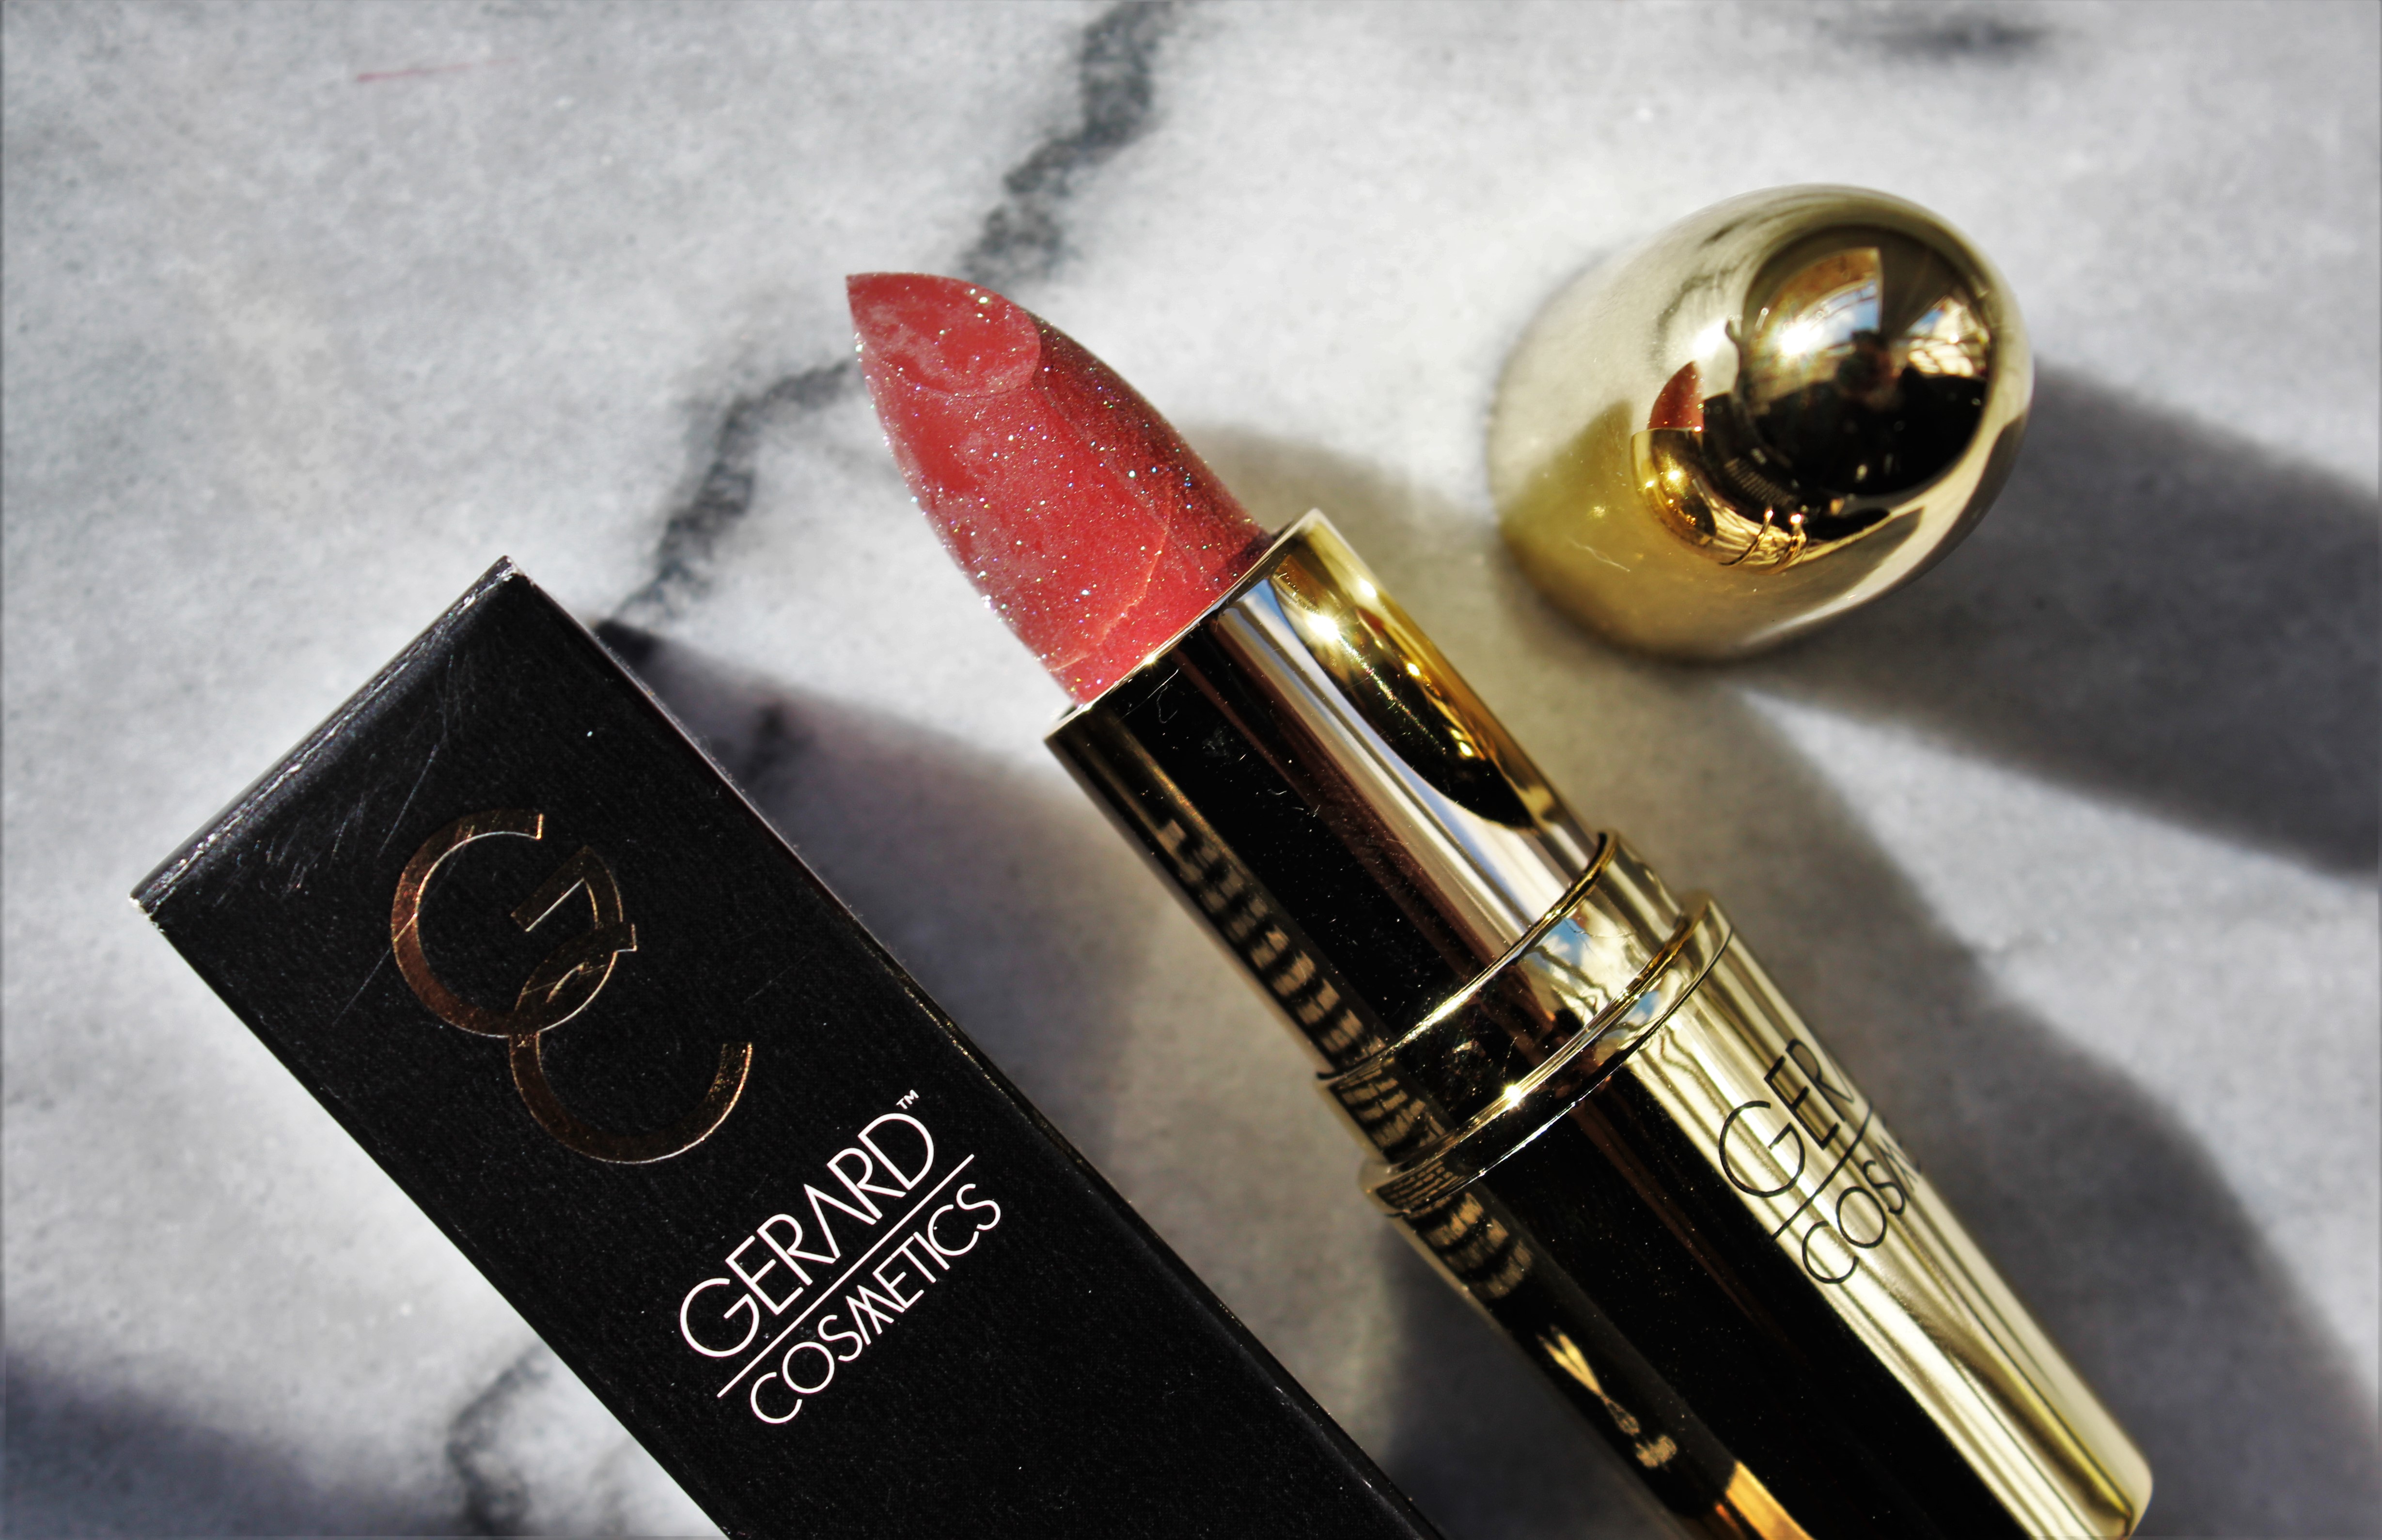 Gerard Cosmetics French Toast lipstick | review